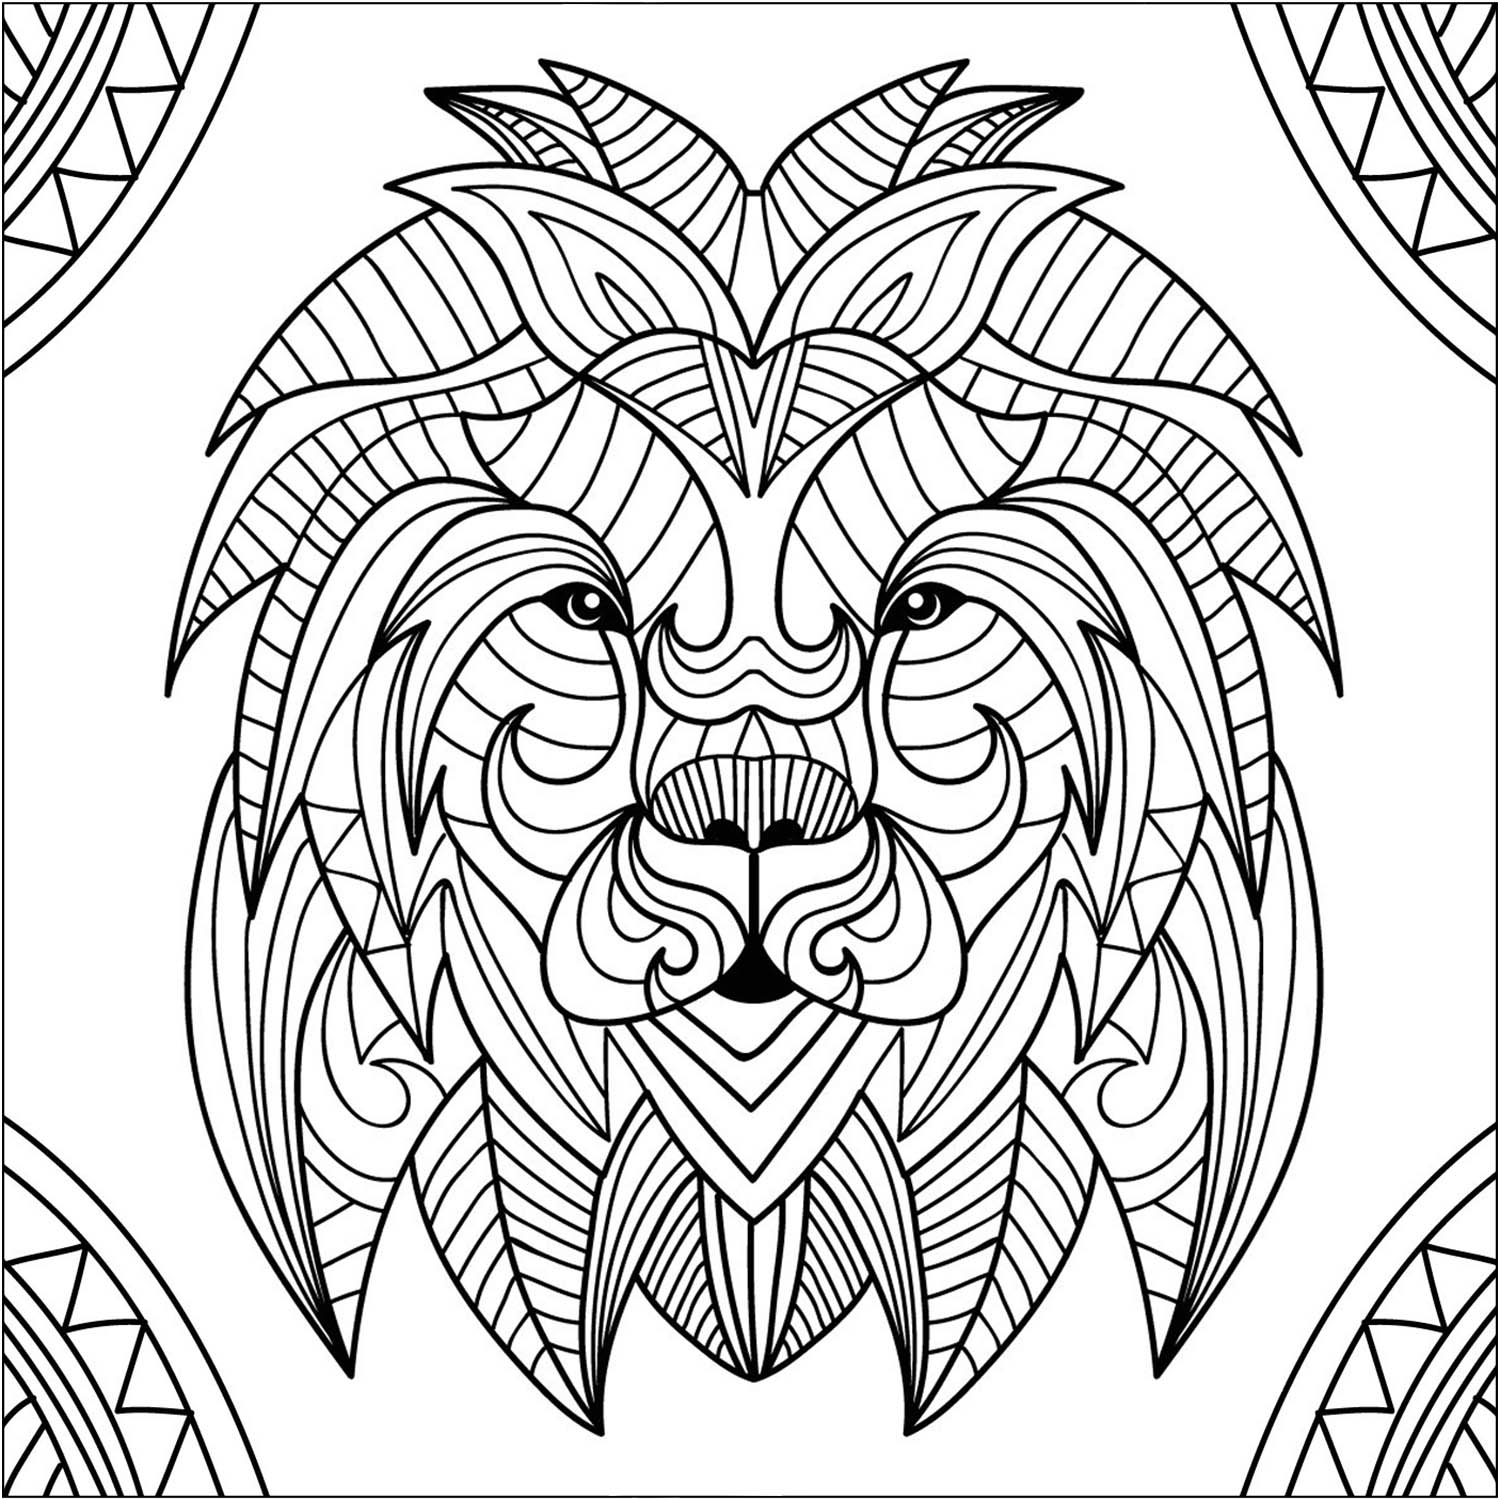 A nice lion head in mandala style, with the background